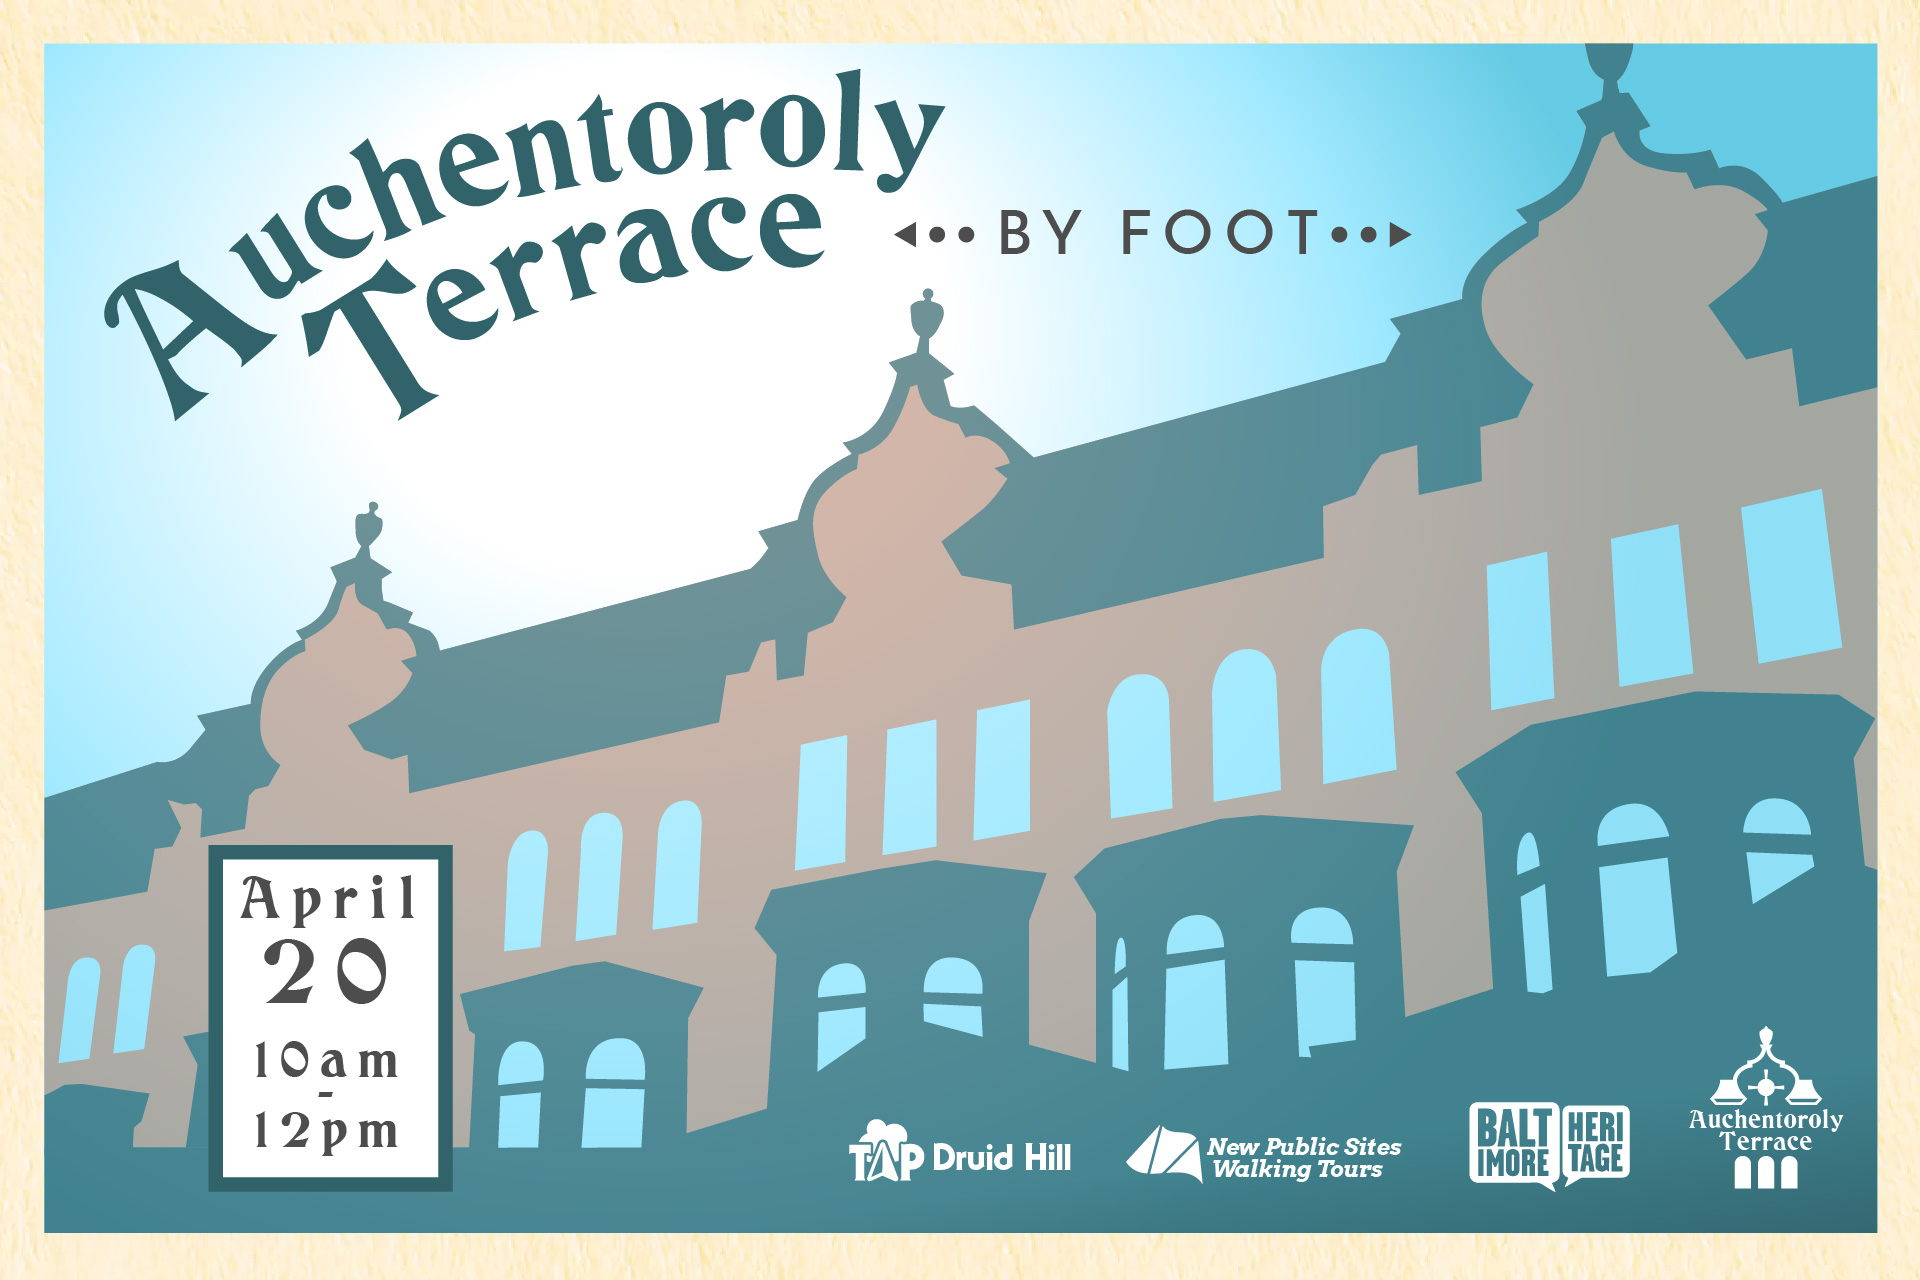 Auchentoroly Terrace by Foot web banner